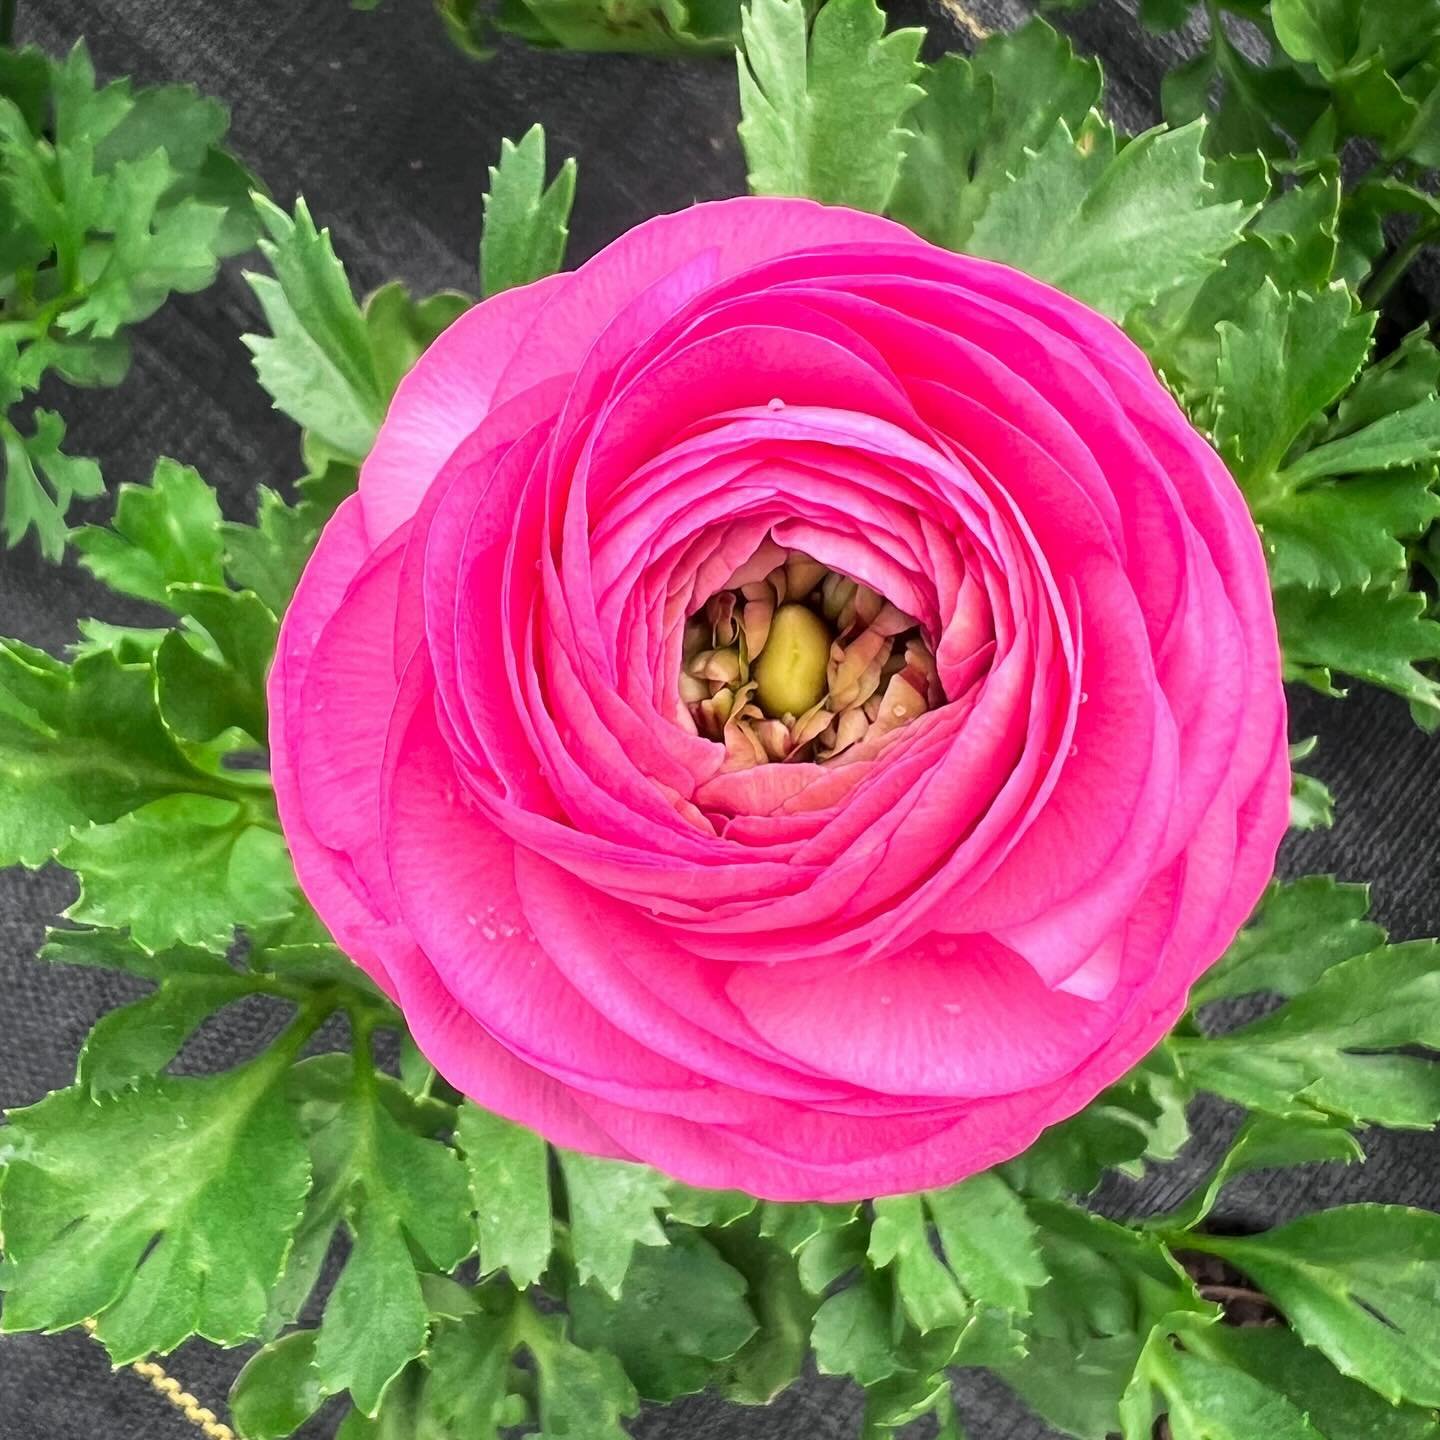 Yes, Virginia, there will be ranunculus on Mother&rsquo;s Day. The women of Morgantown must have been extra good this year. 
.
.
.
#ranunculus #springflowers #mothersdayflowers #mayfieldfarm #mayfieldfarmwv #morgantownflowerfarm #flowerfarm #flowerfa